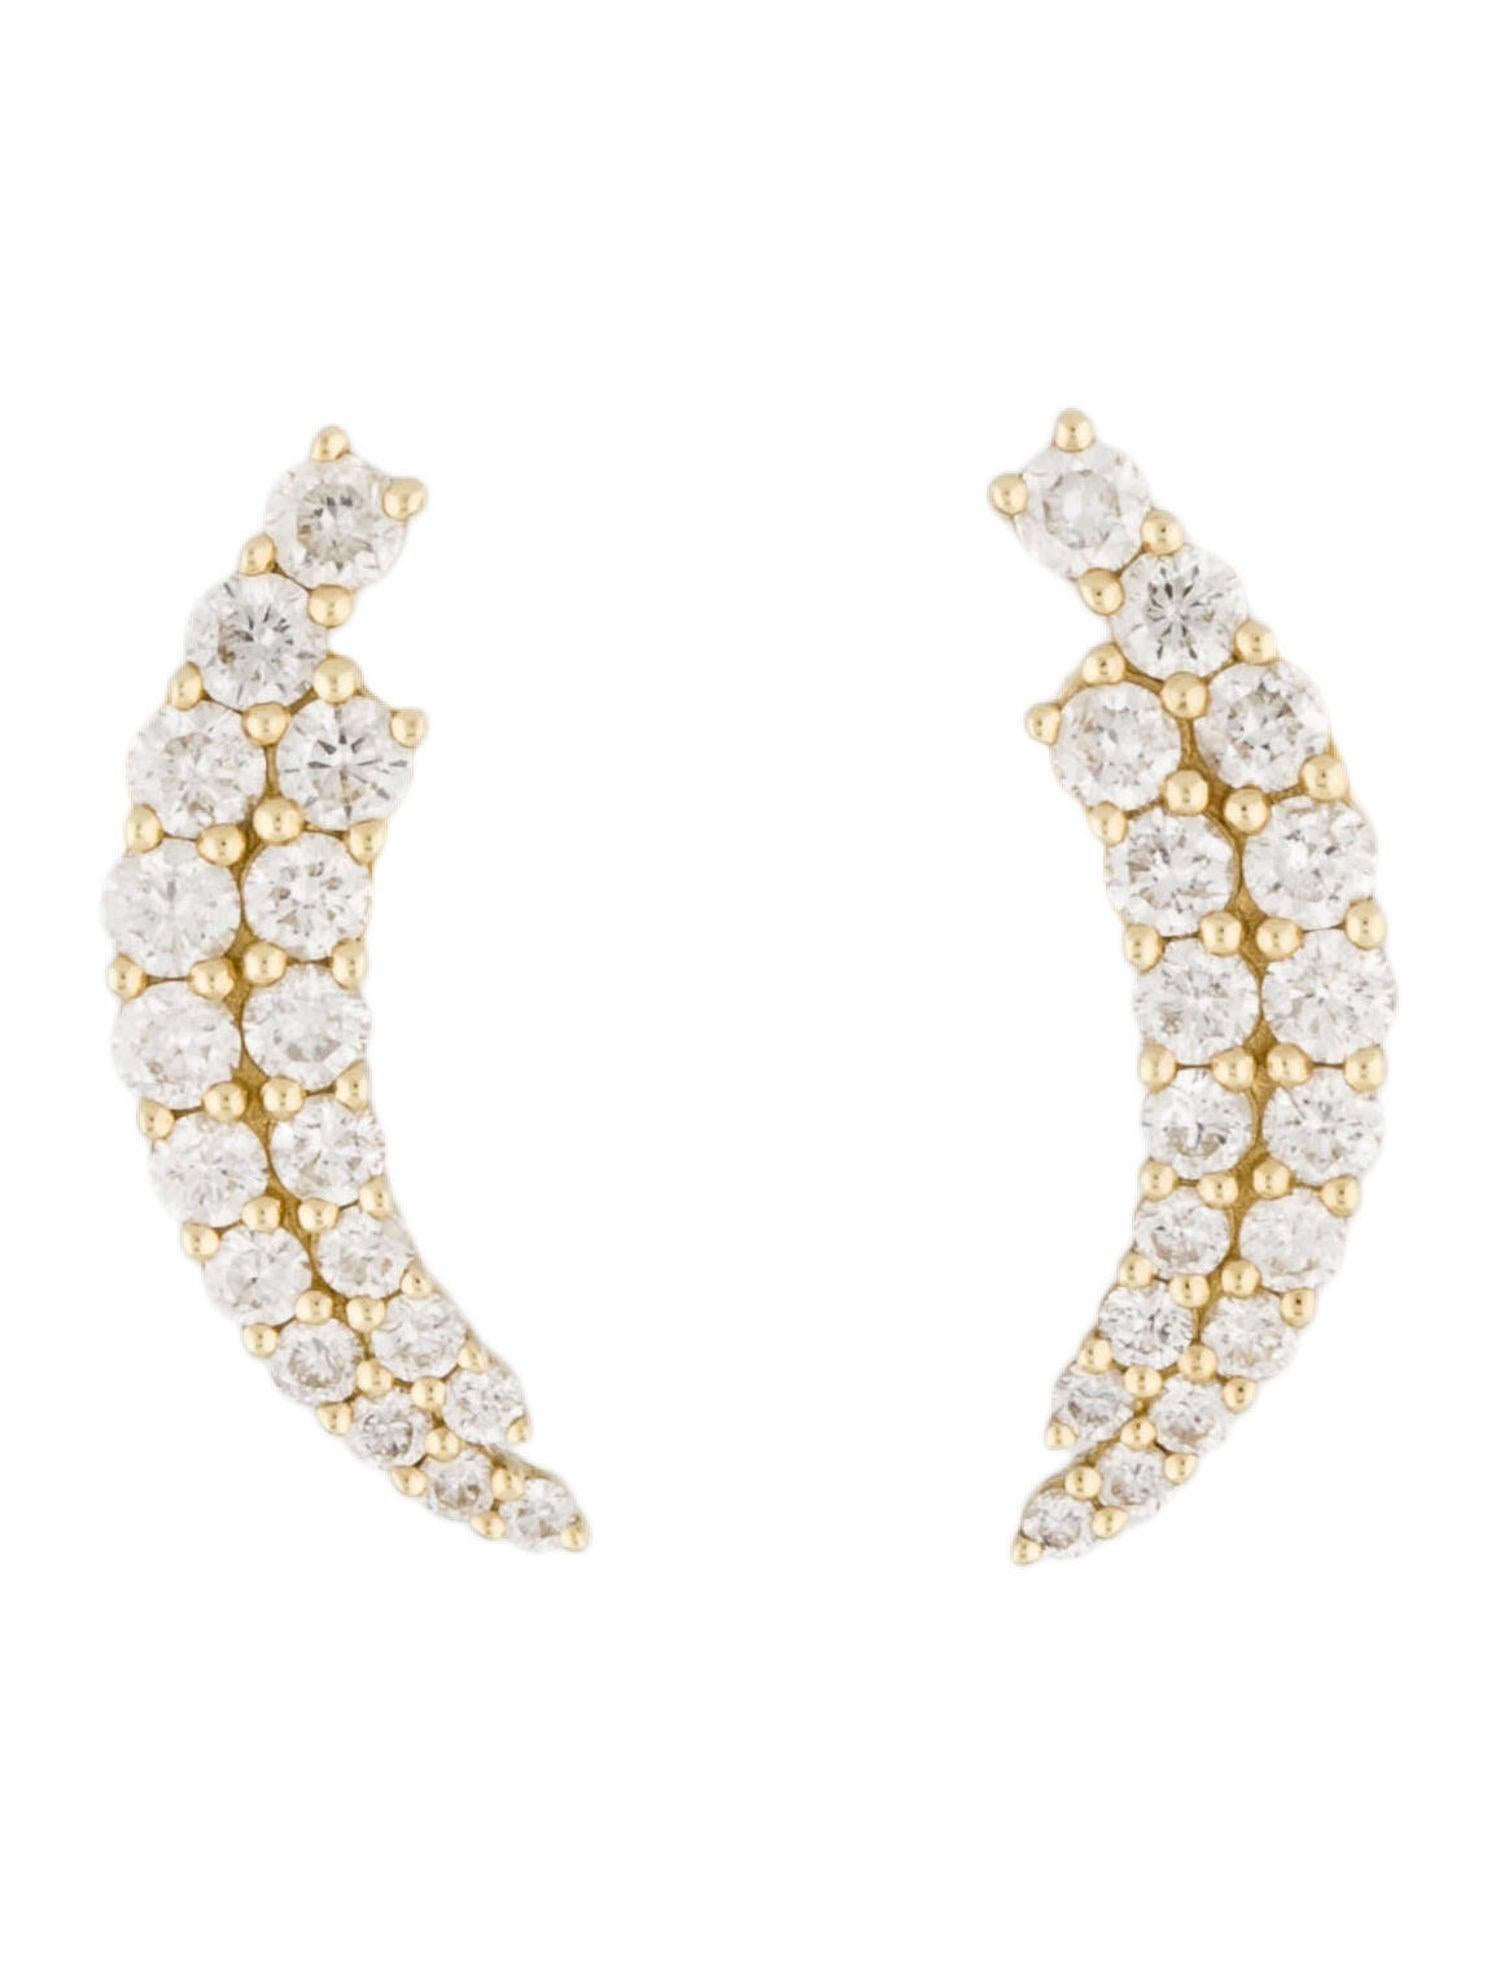 14 Karat Yellow Gold 1.31 Carat Diamond Ear Climber Earrings In New Condition For Sale In Great neck, NY